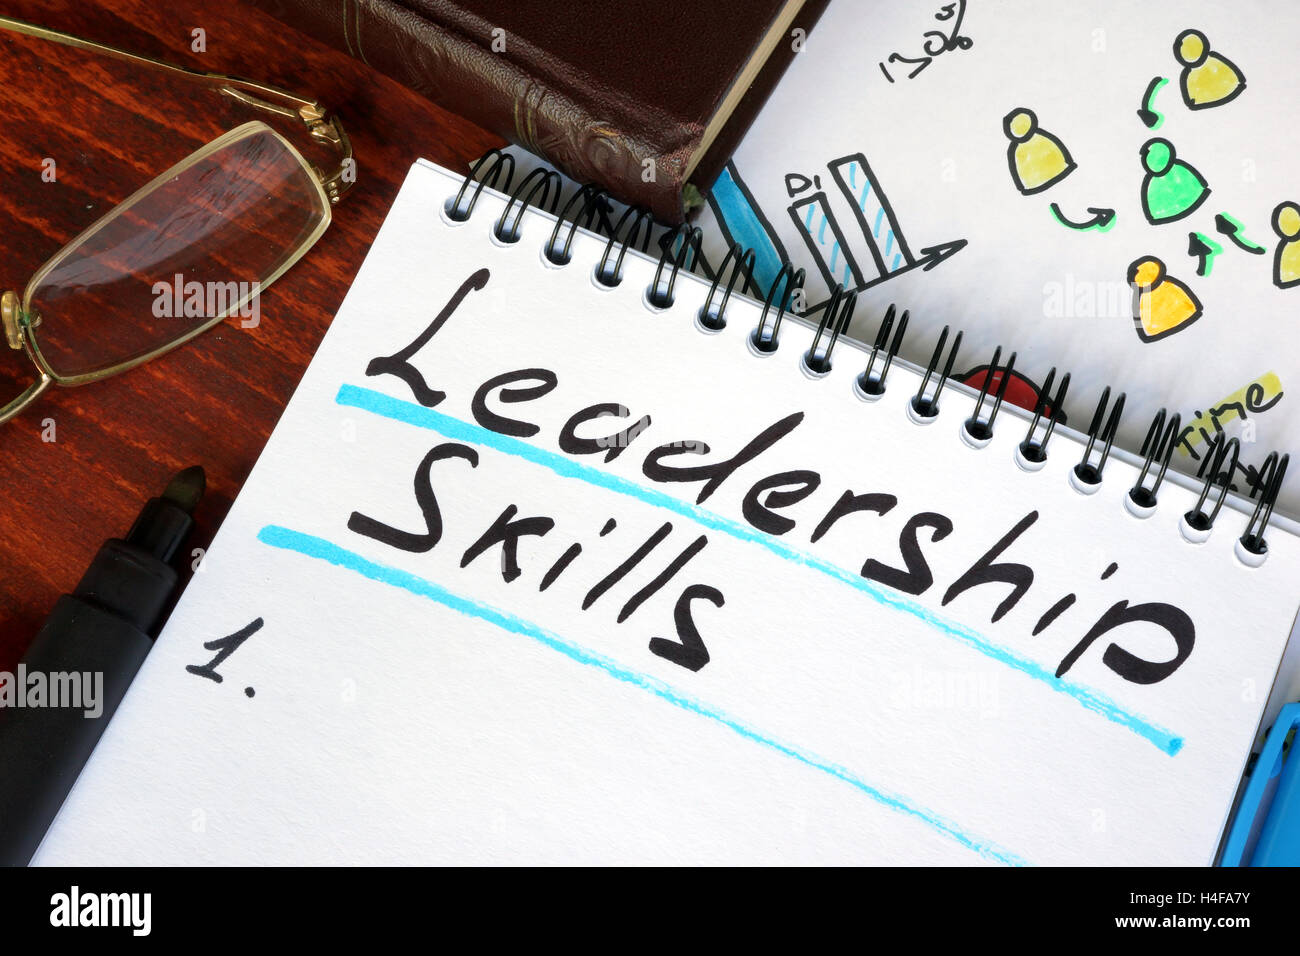 Notepad with leadership skills on a wooden surface. Stock Photo